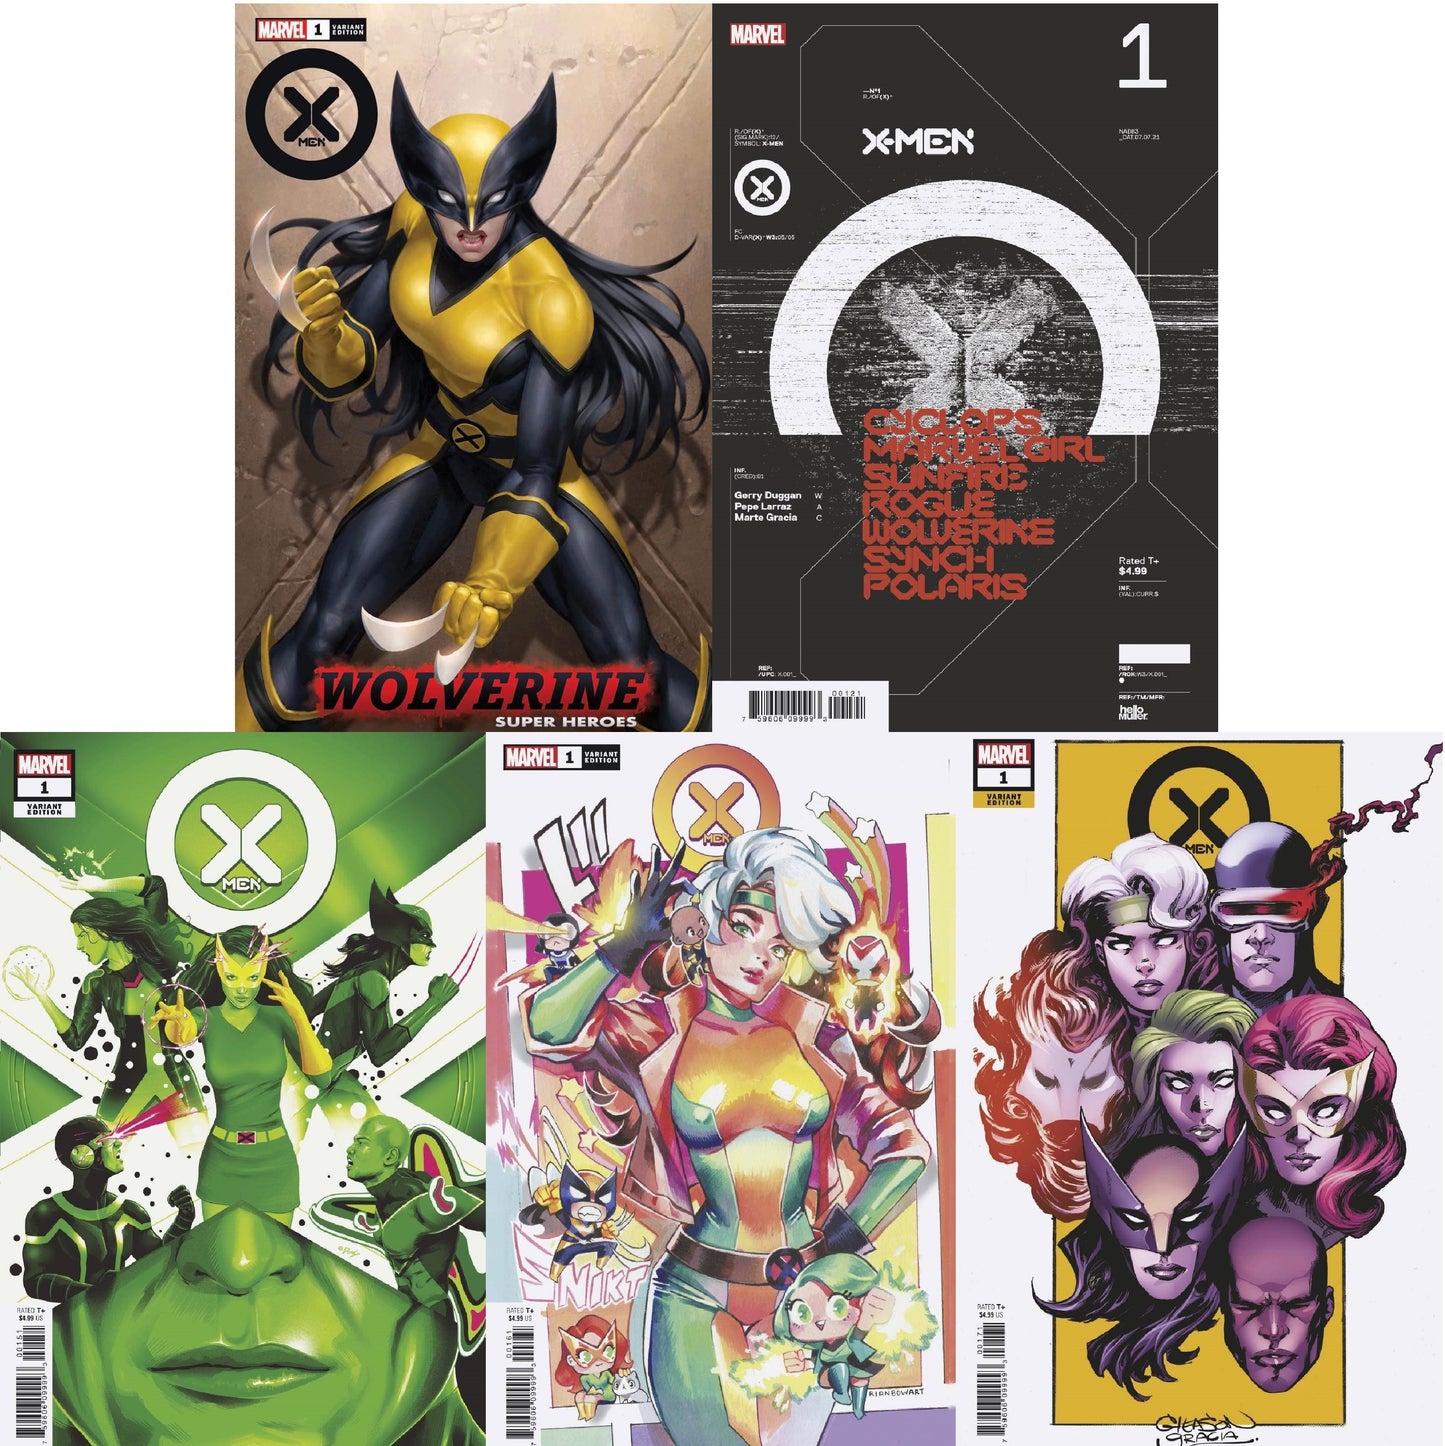 X-MEN #1 JUNGGEUN YOON WOLVERINE X-23 TRADING CARD VARIANT LIMITED TO 800 COPIES WITH NUMBERED COA & RATIO VARIANT SETS